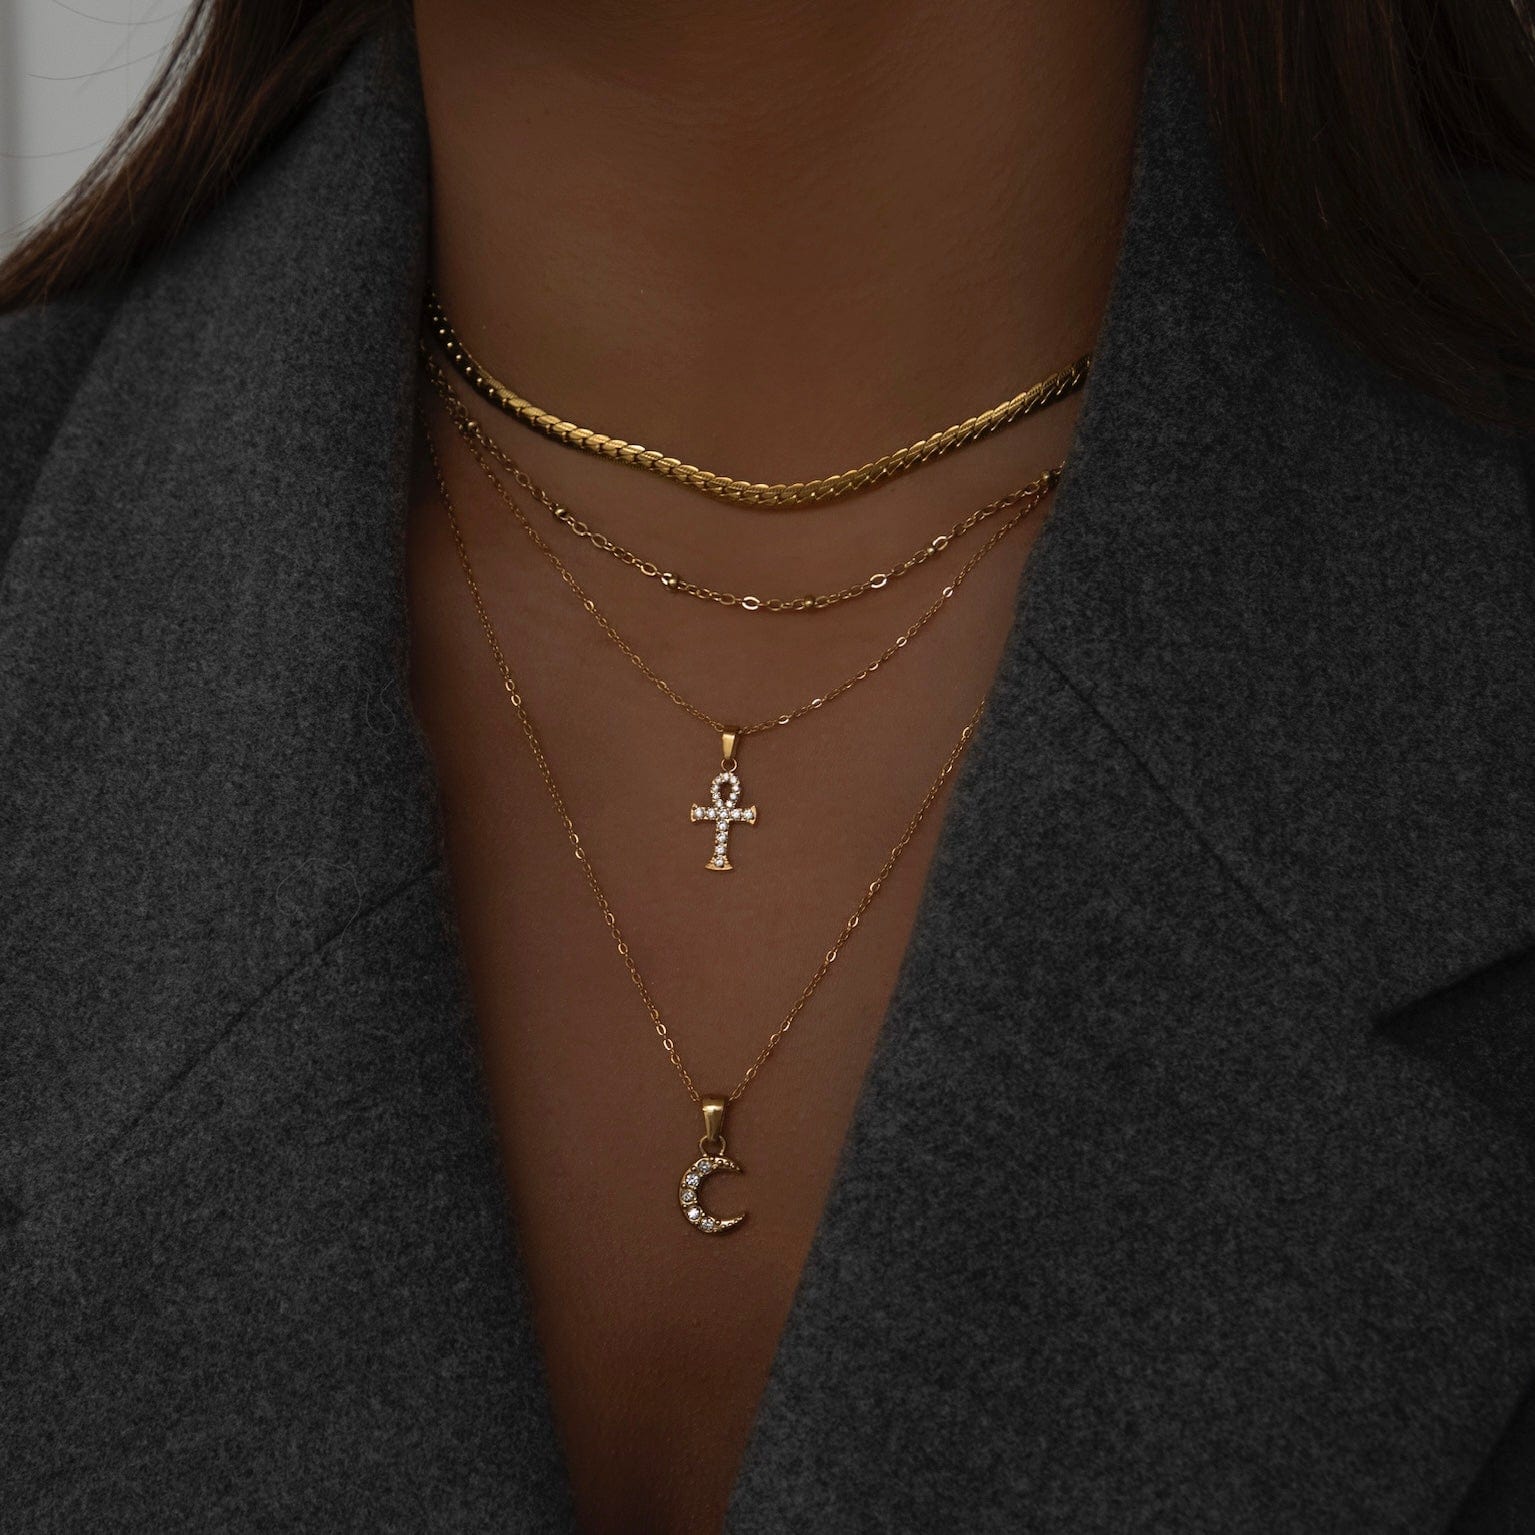 BohoMoon Stainless Steel Ankh Necklace Gold